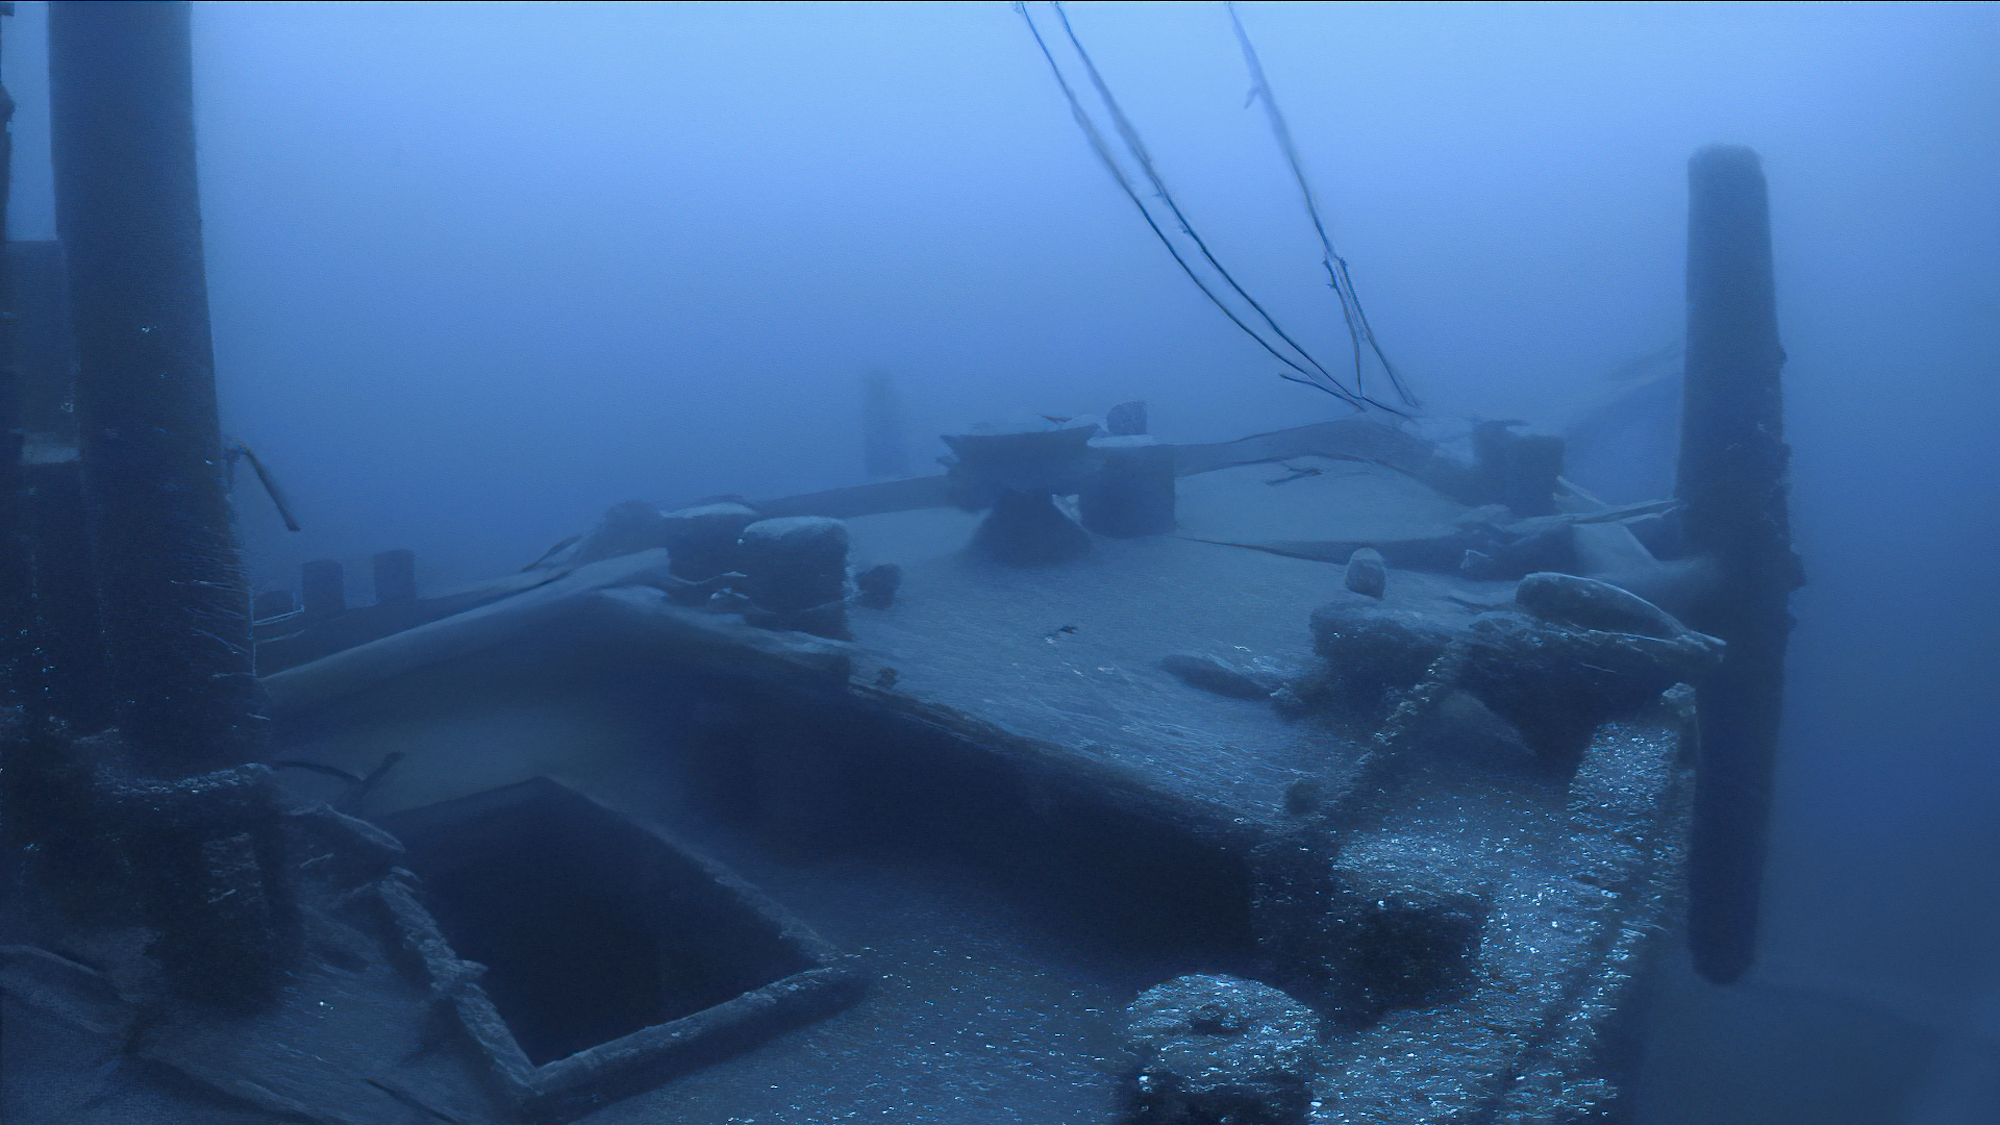 Get a high-tech tour of the long-lost Ironton shipwreck discovered in the Great Lakes